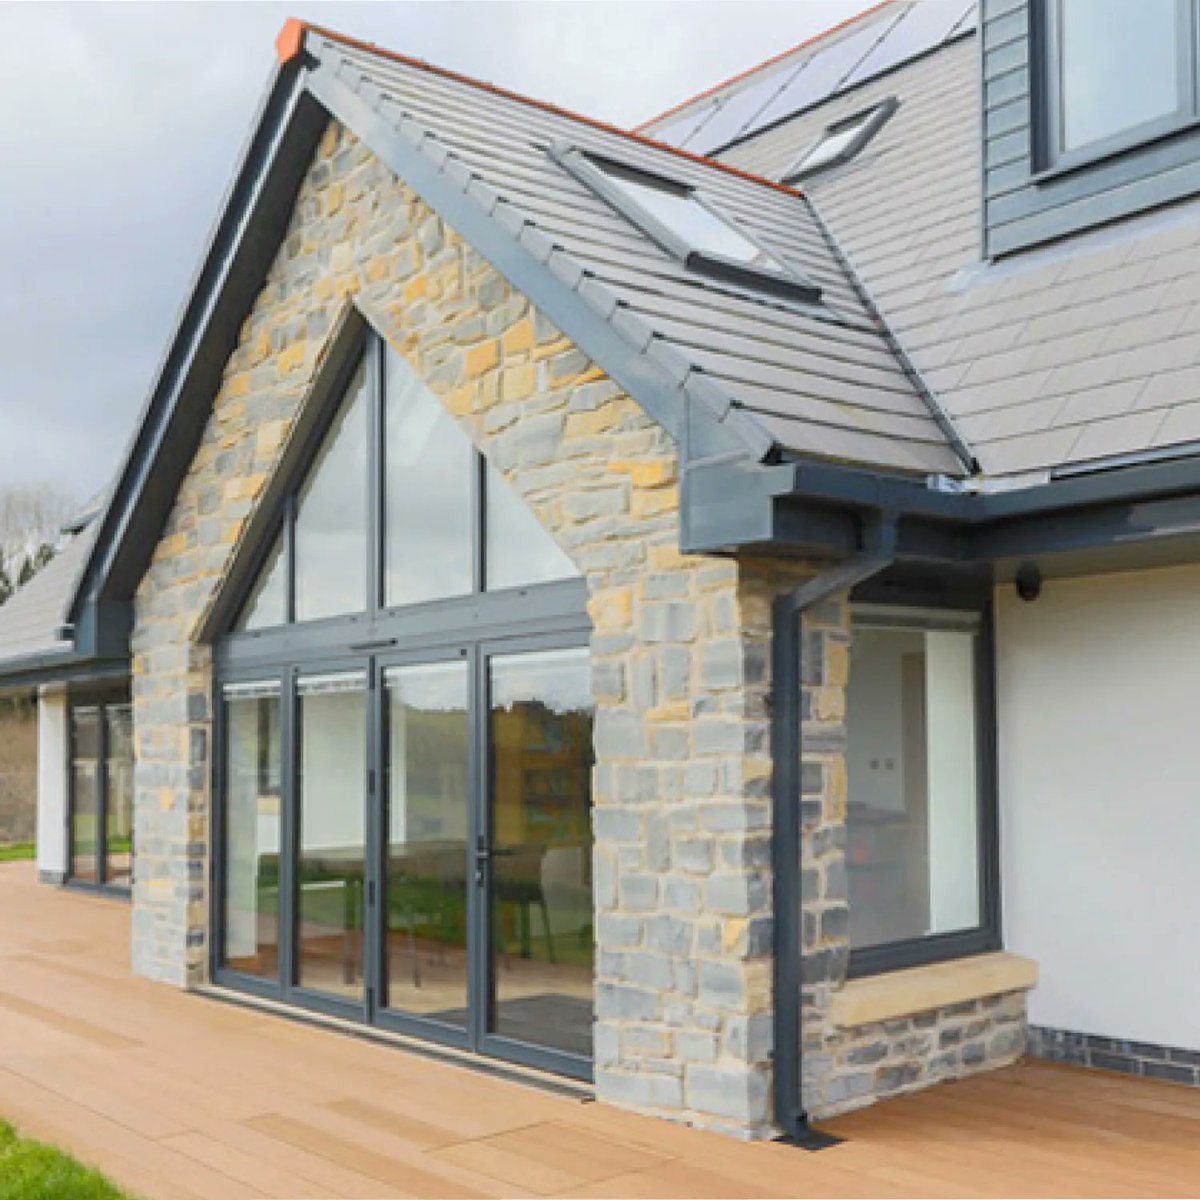 What's so great about our aluminium #doors and #windows? • Lightweight, strong and secure • Almost 100% recyclable • Huge range of colours • Maintenance free • 20 year warranty • Made in the UK • Flexible specification For more details > buff.ly/3RJL3QW #light